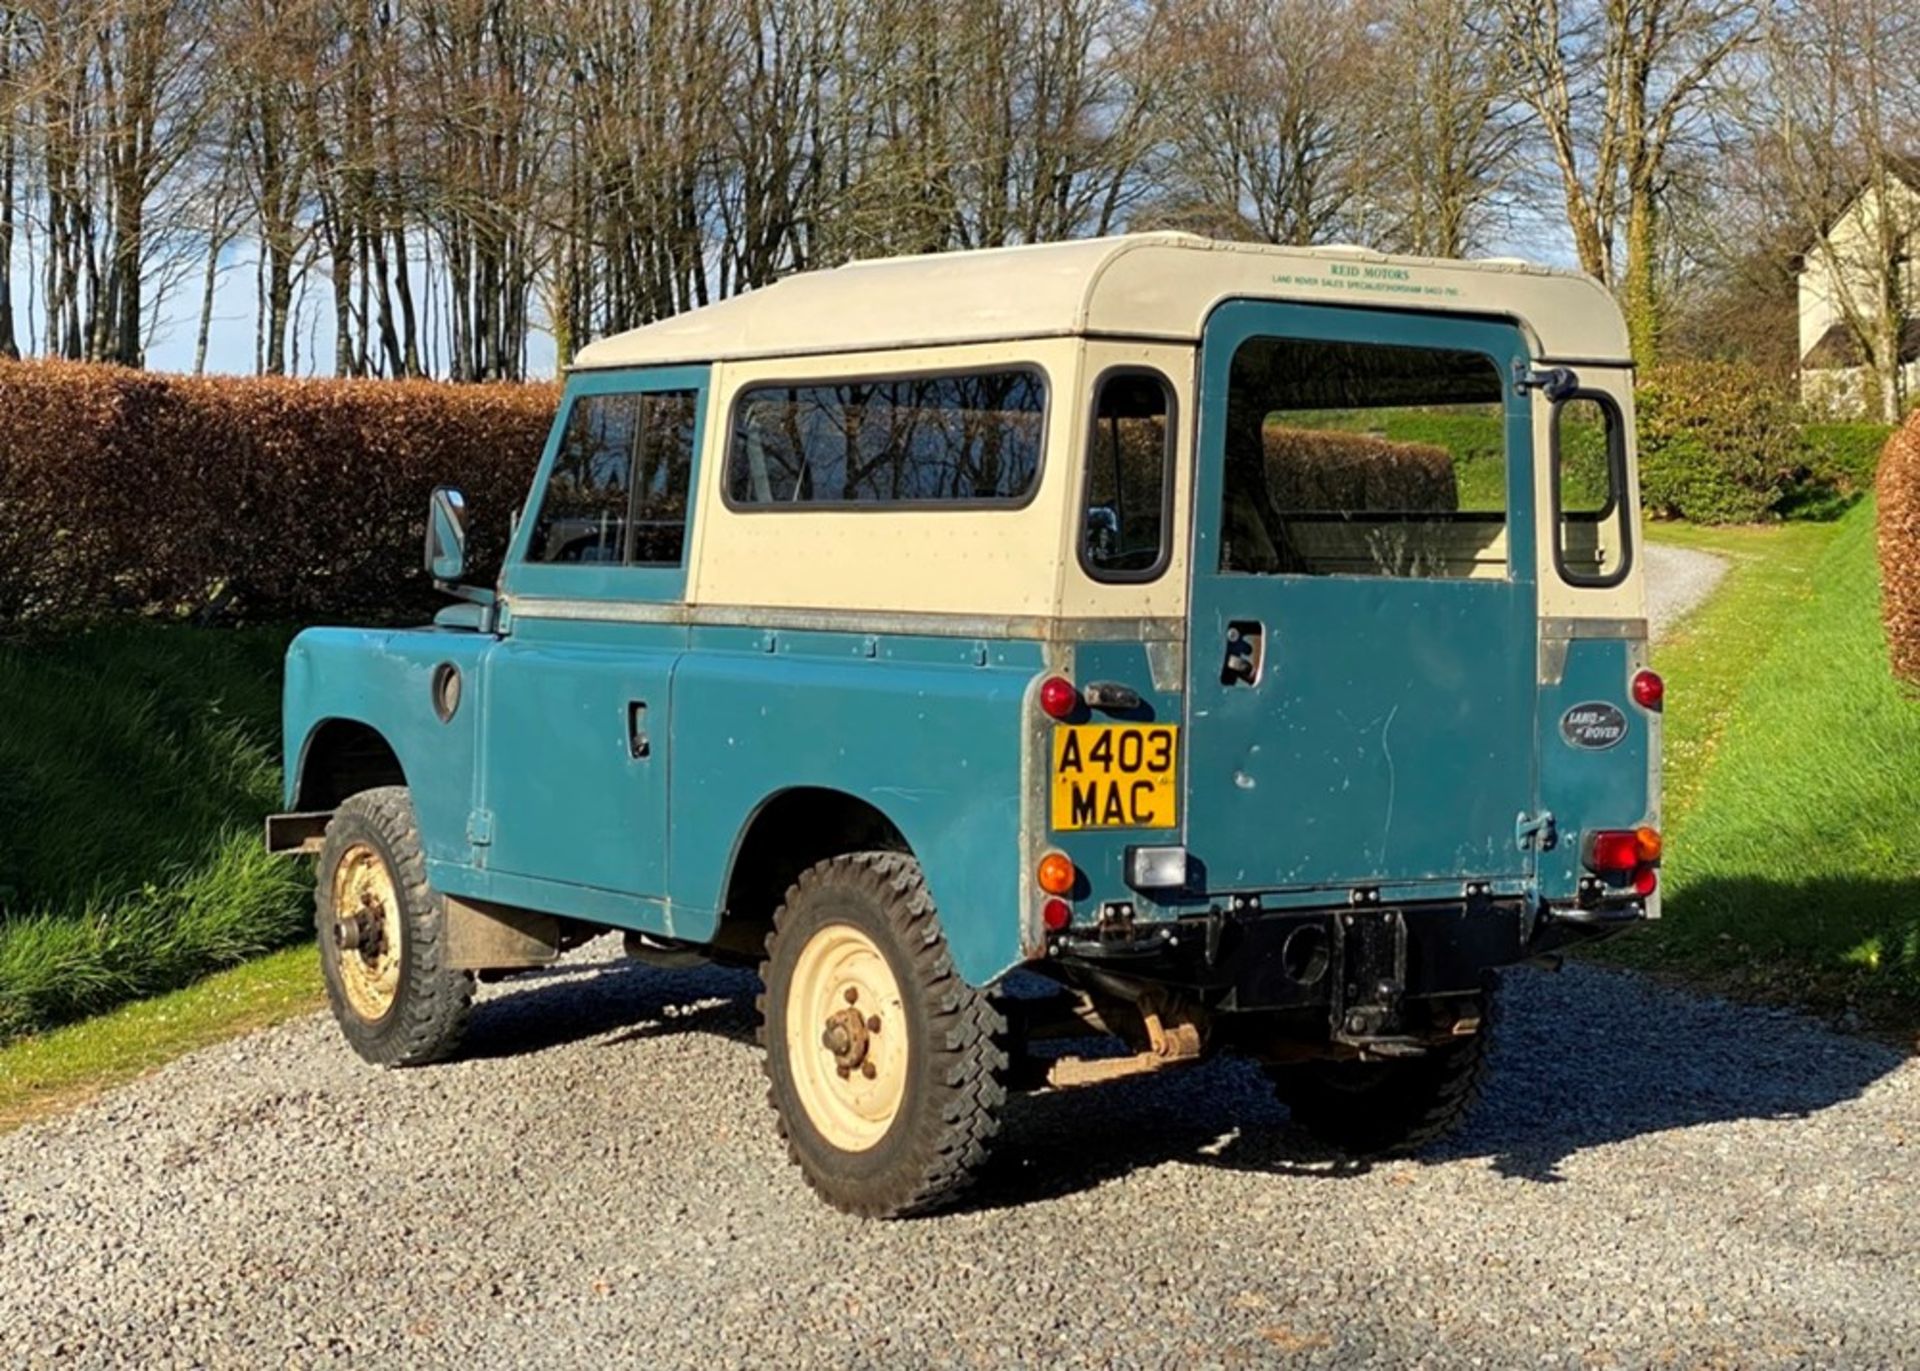 1984 Land Rover Series III - Image 7 of 9